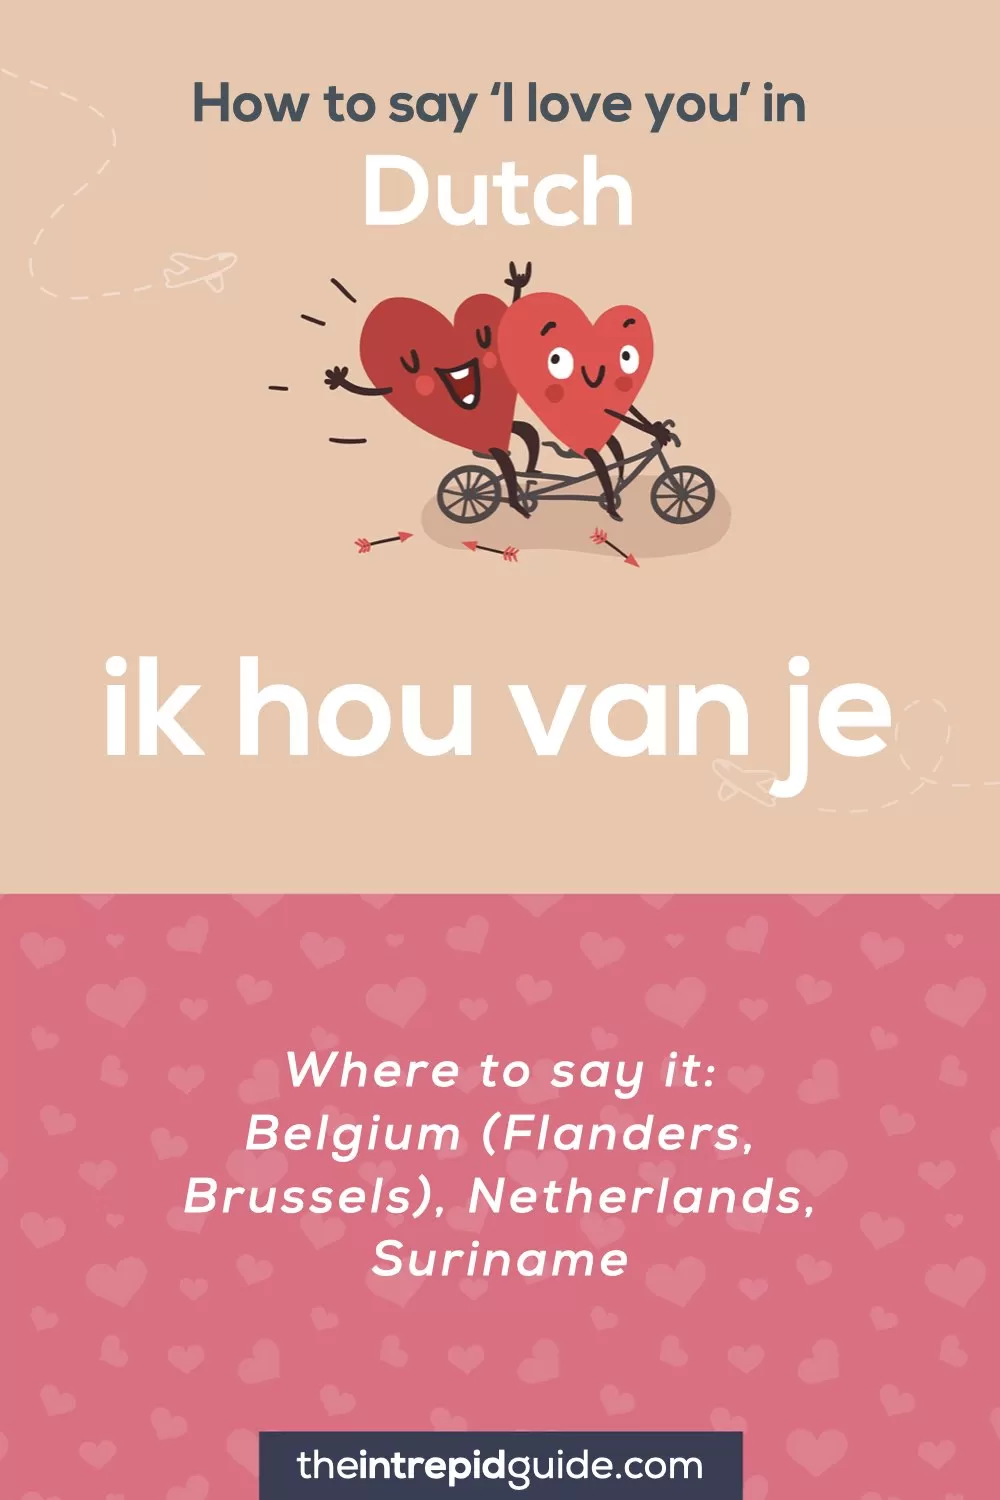 How to say I love you in different languages - Dutch - ik hou van je